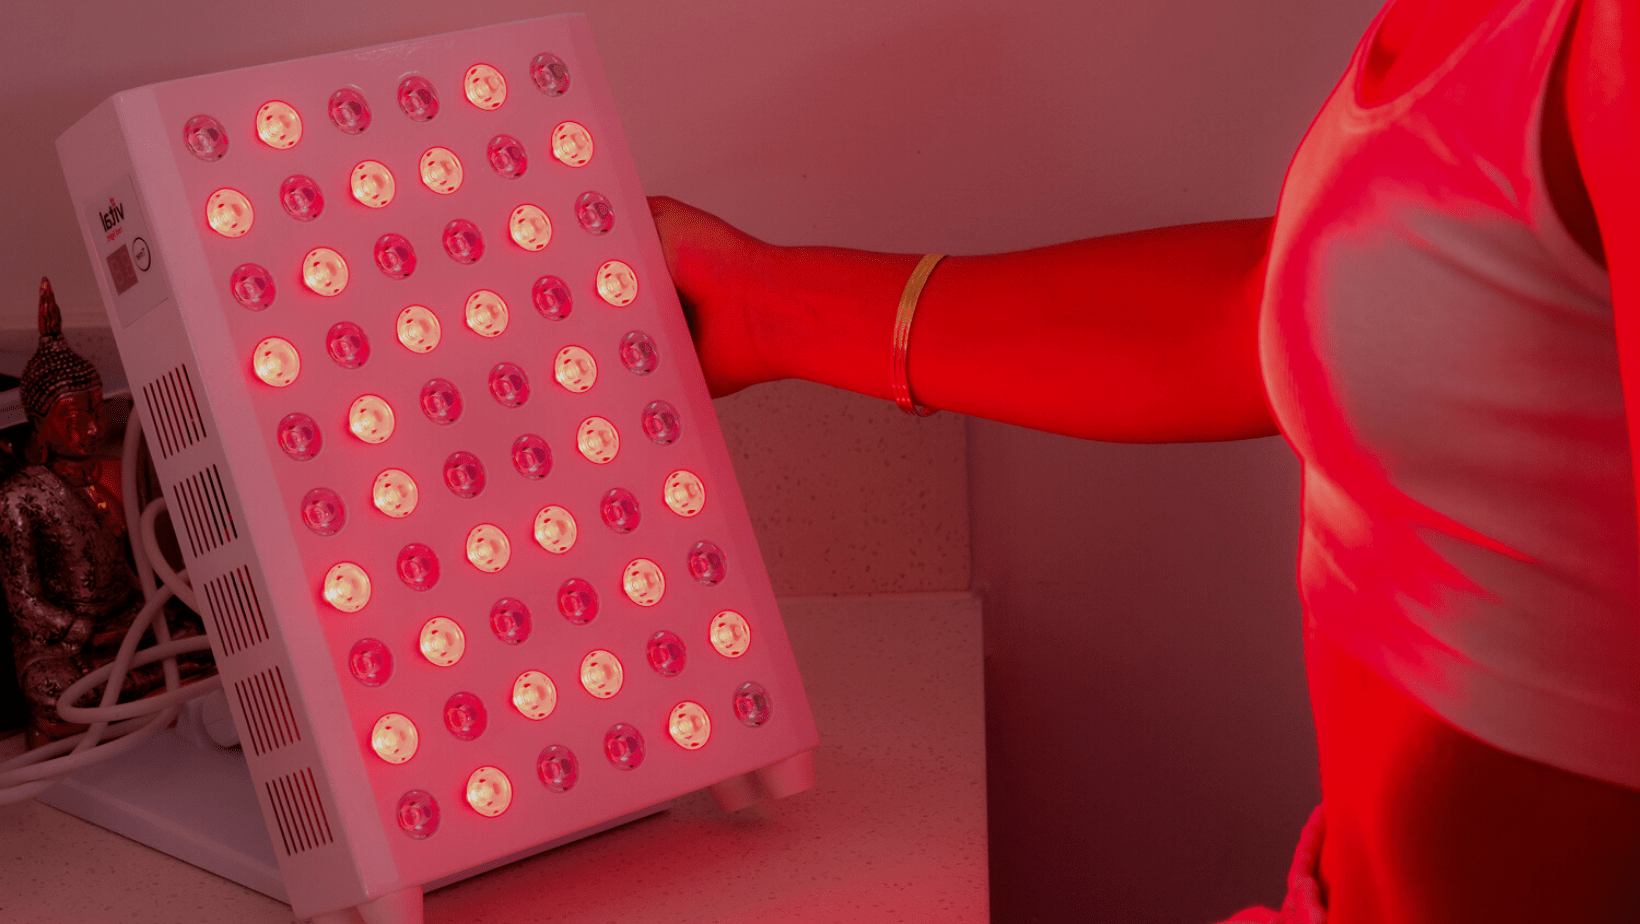 The Complete Guide to Red Light Therapy